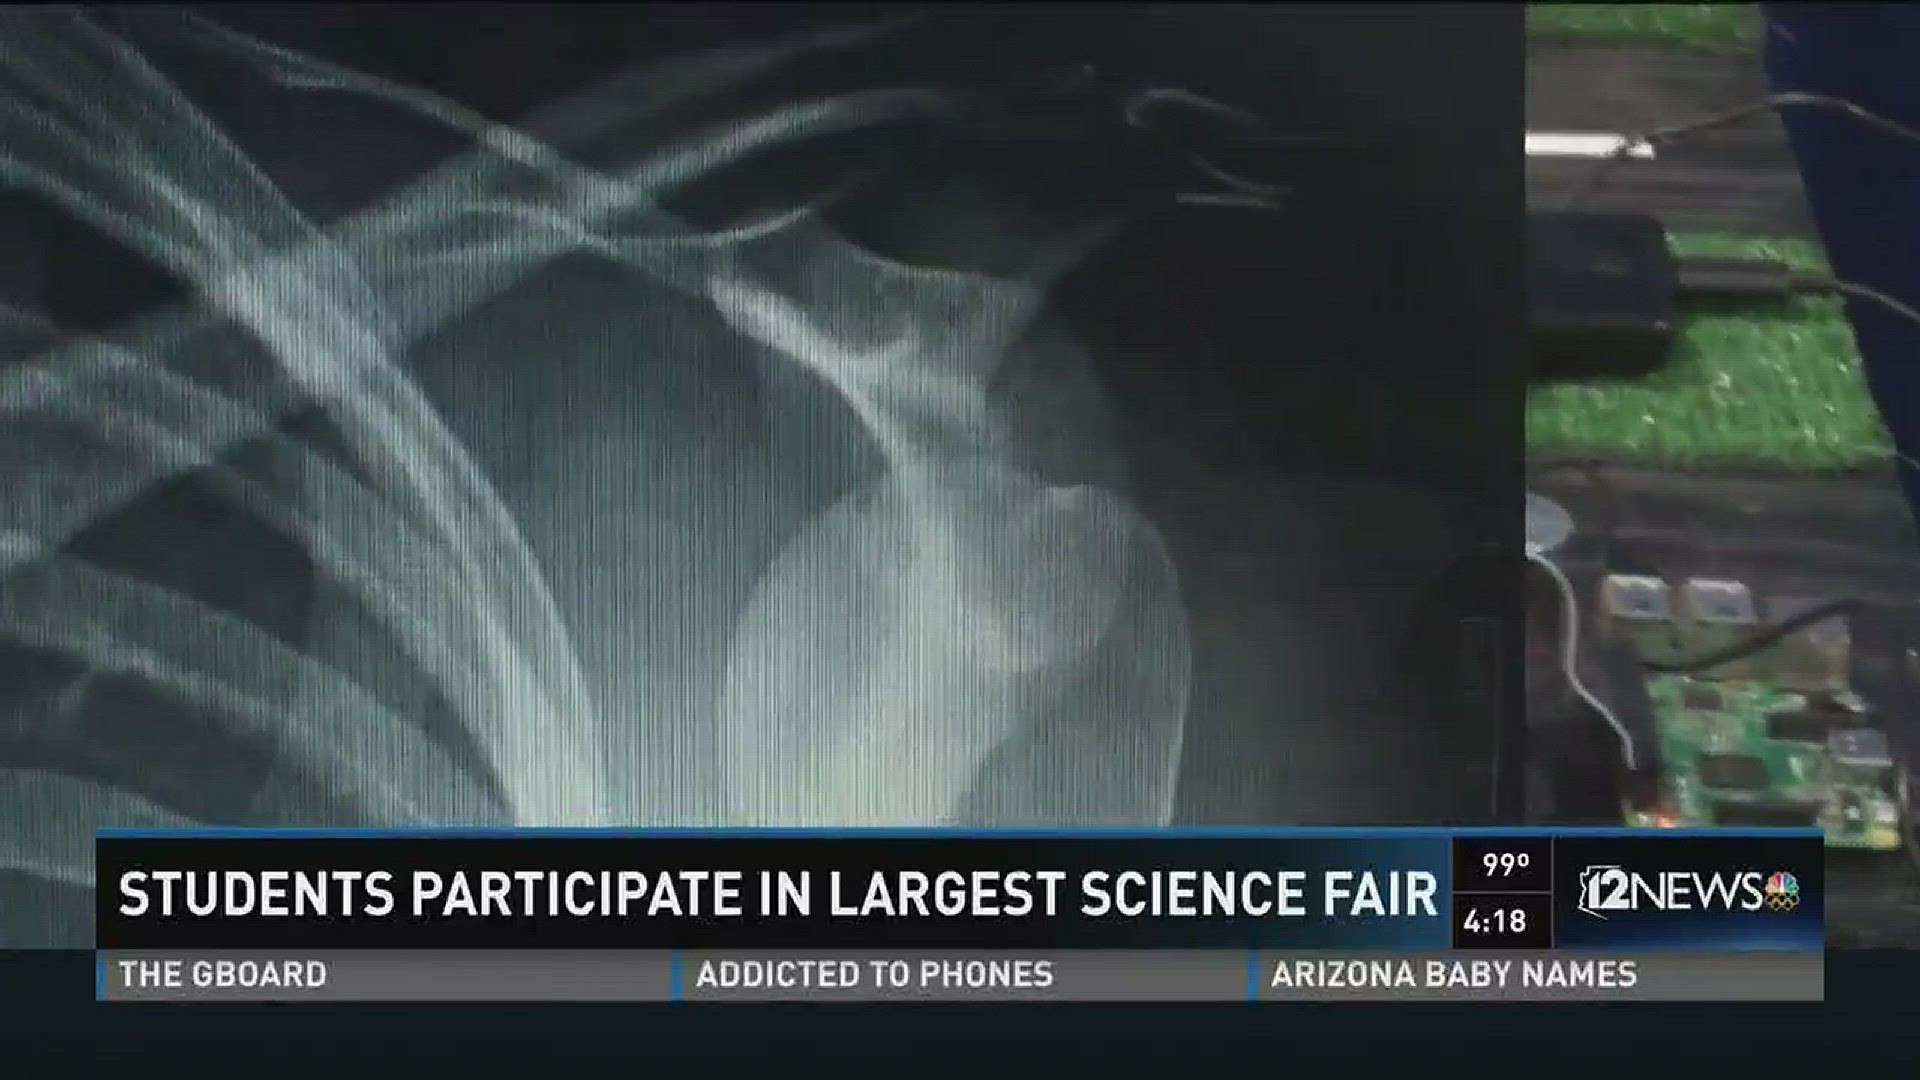 Hundreds participate in world's largest high school science fair | 12news. com